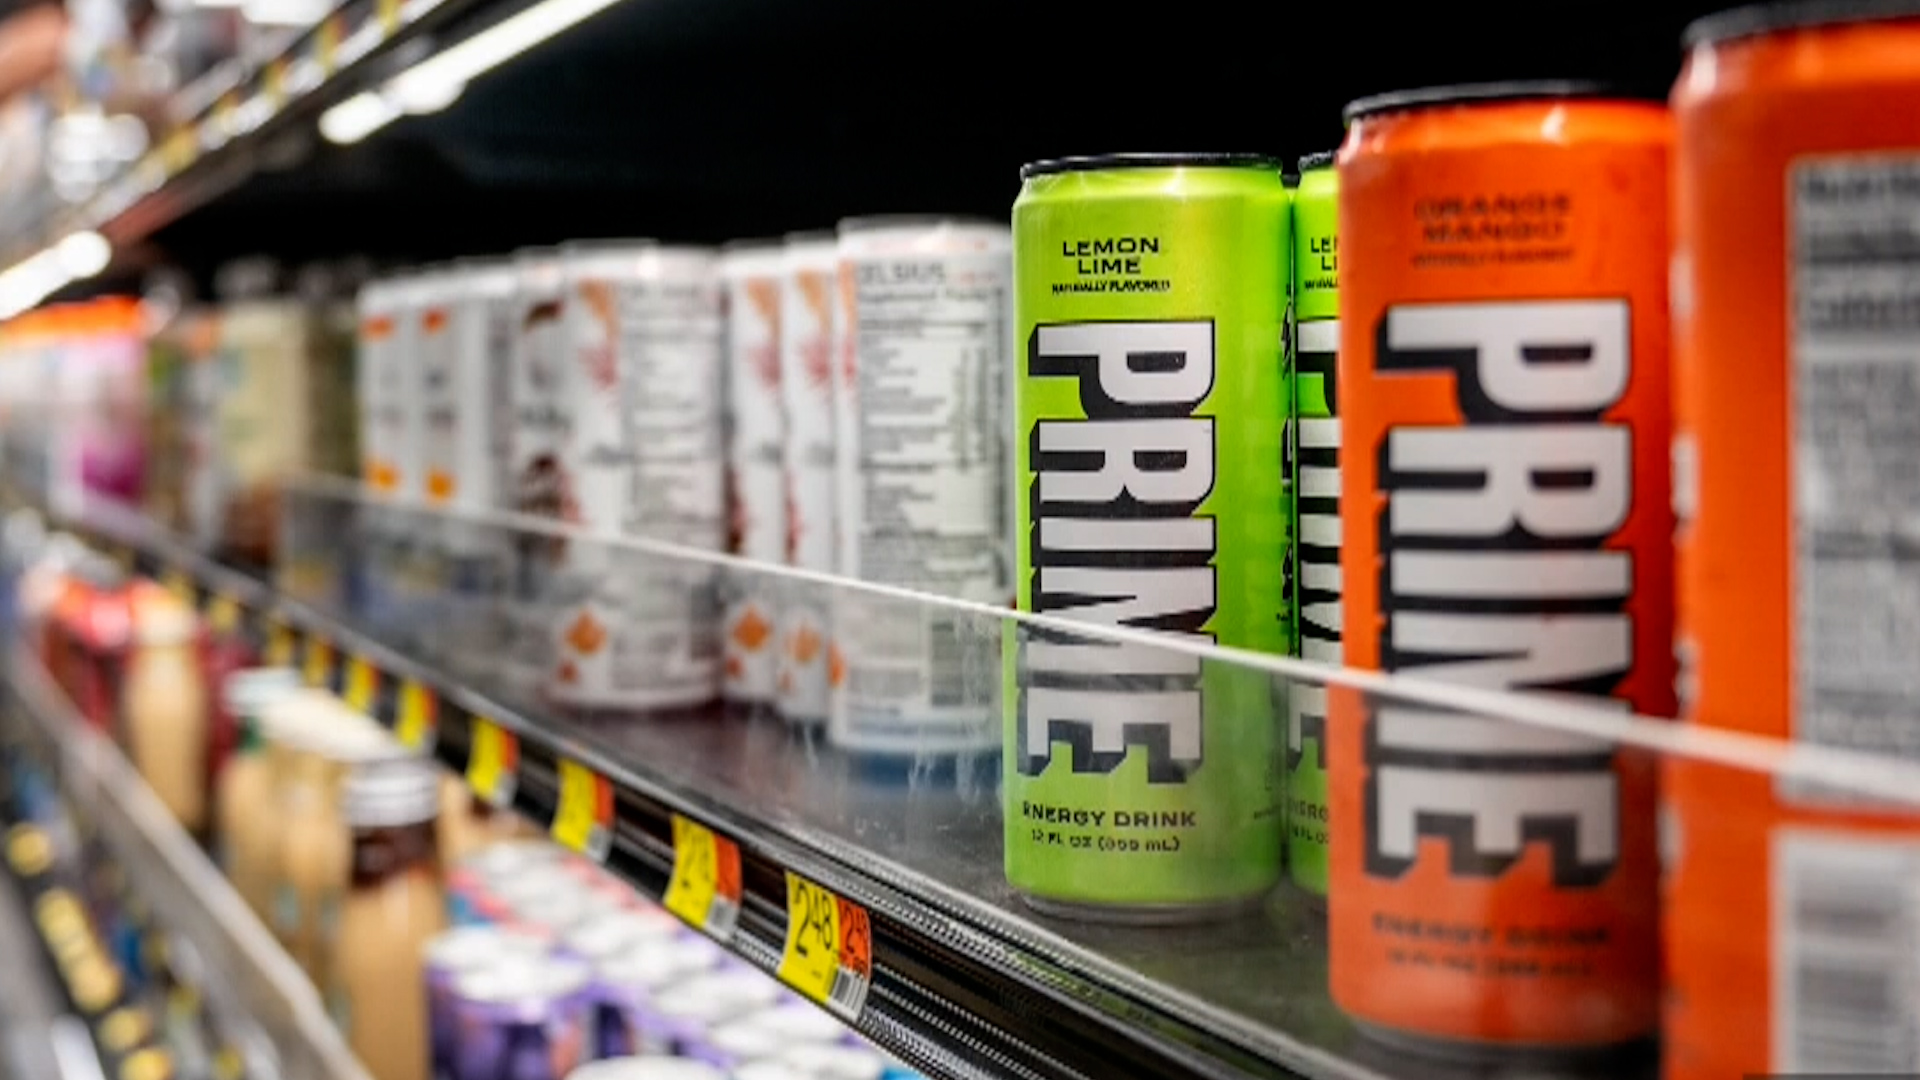 More than 20 types of energy drink now included in Canadian recall